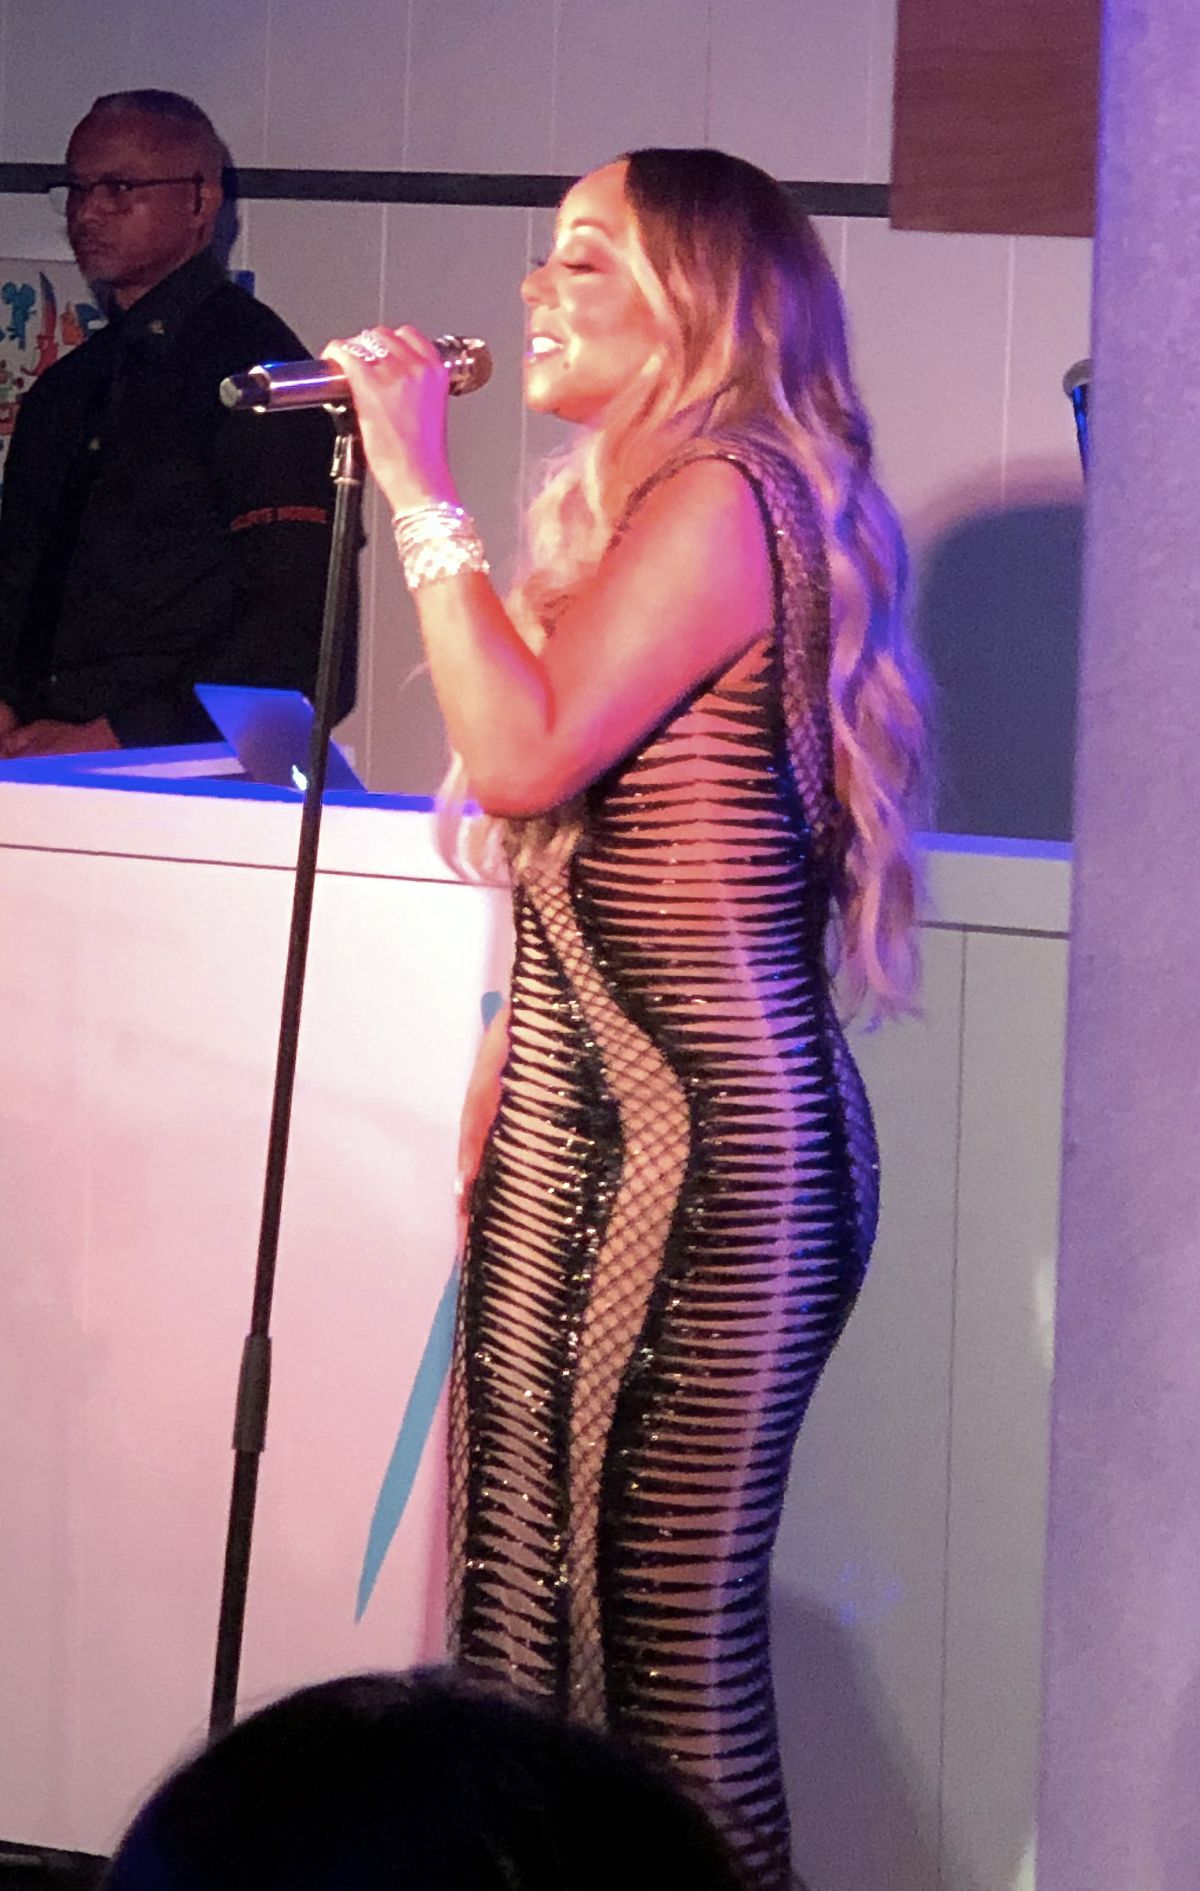 mariah-carey-performs-at-new-year-s-eve-party-at-nikki-beach-in-saint-barthelemy-12-31-2018-2.jpg